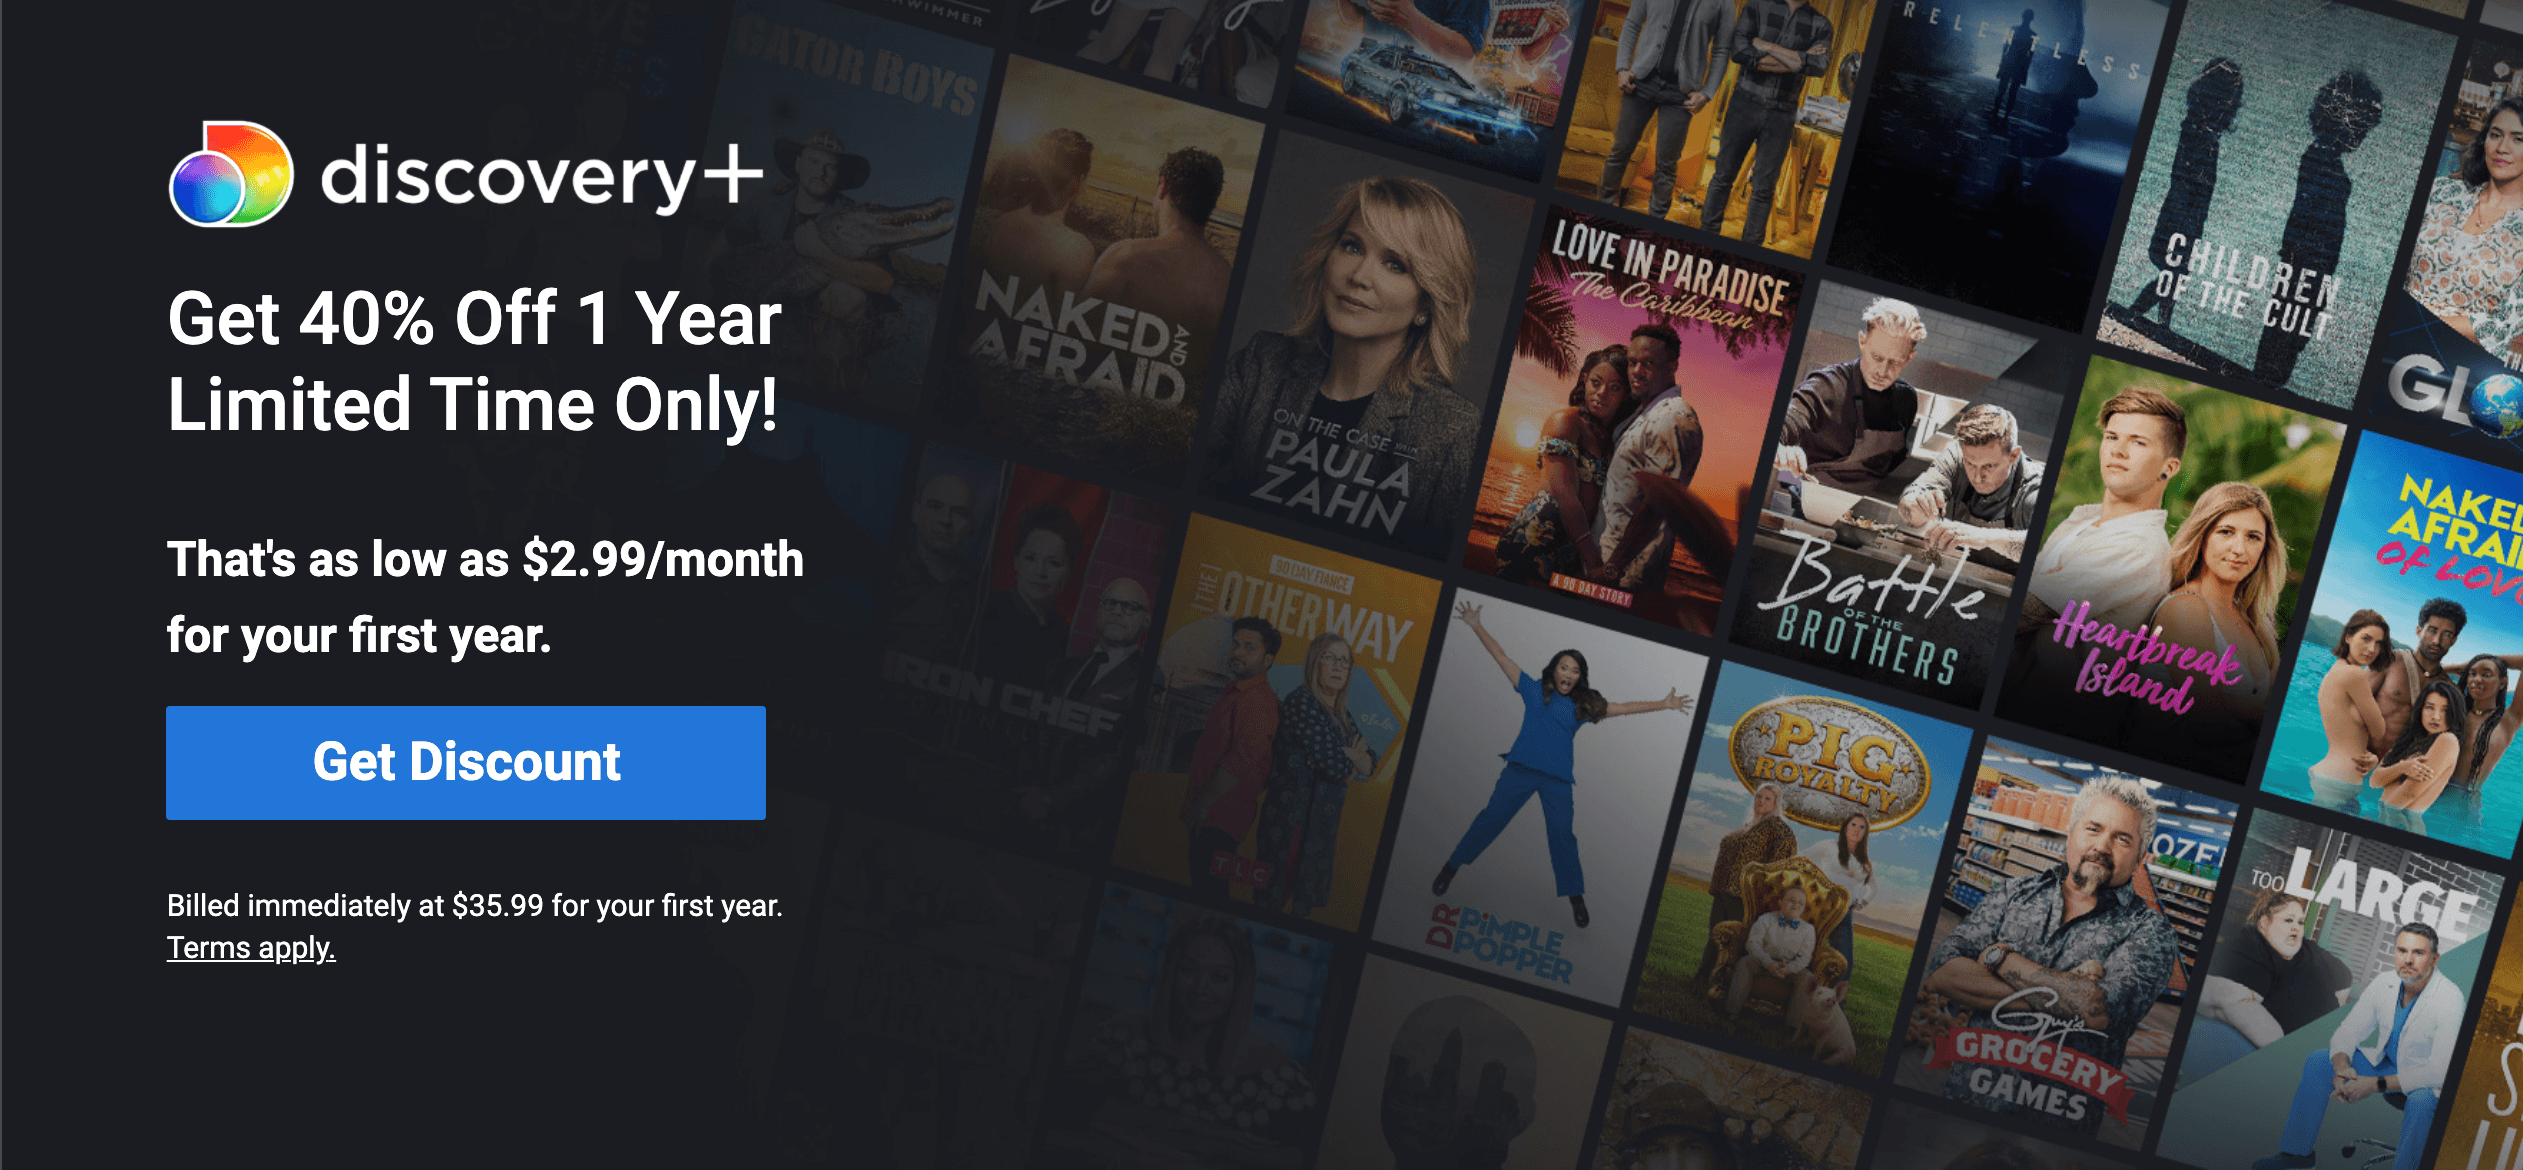 Save 40% on One Year of Discovery+ for a Limited Time